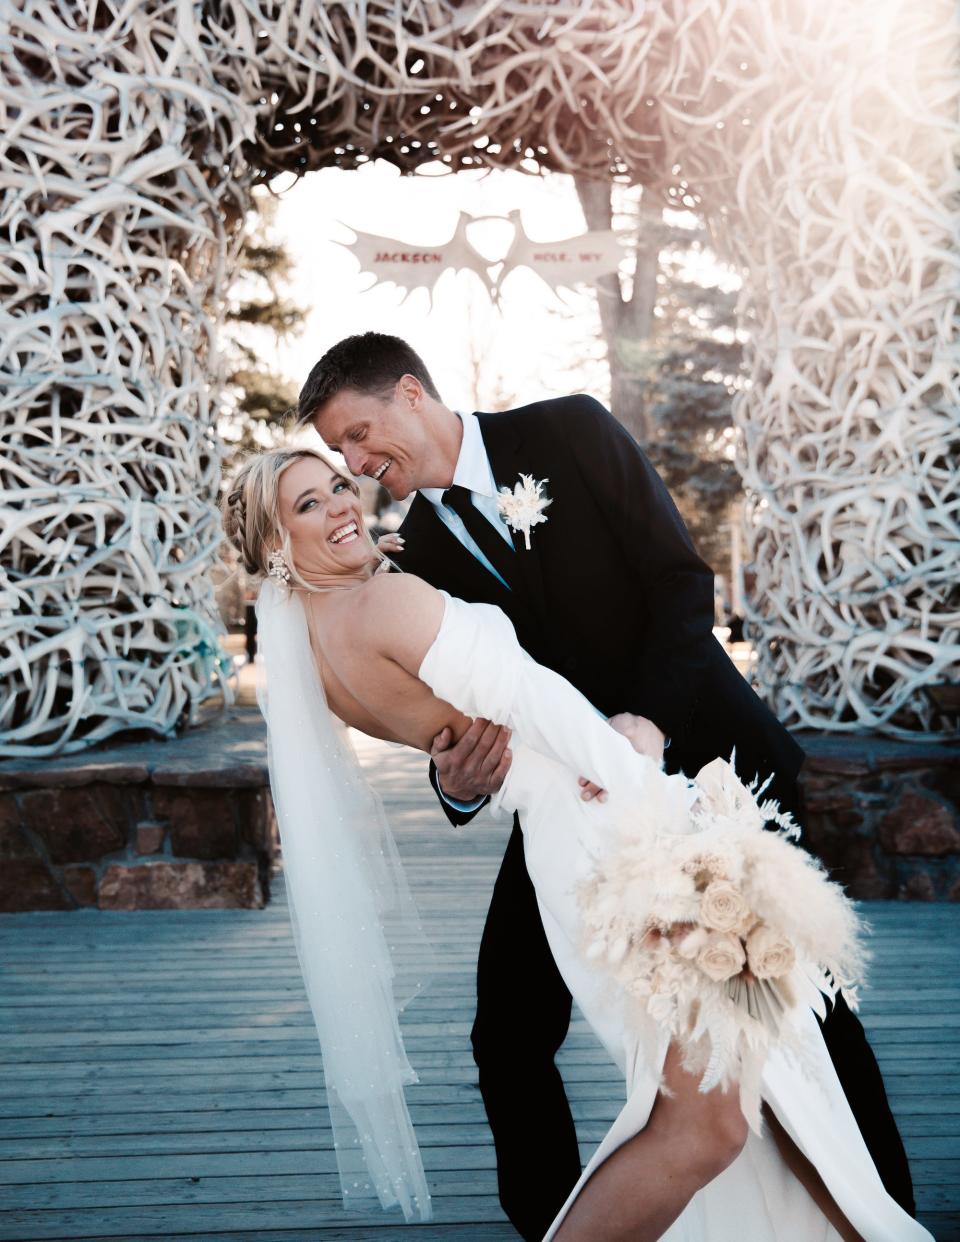 A bride and groom smile in front of an archway as he dips her for a photo.